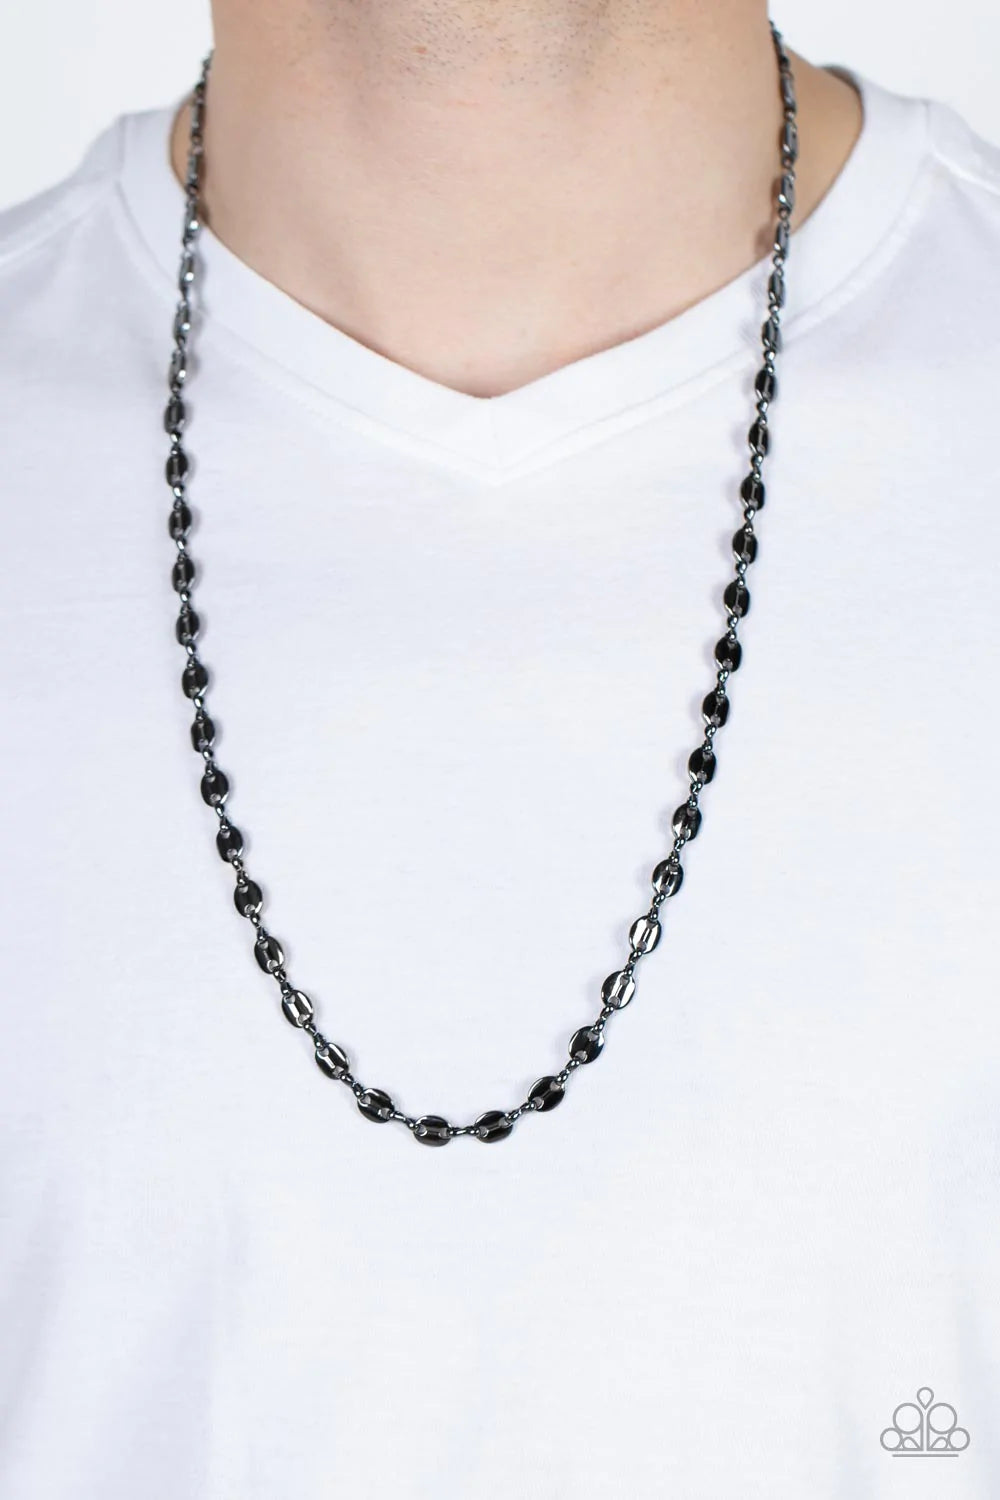 Paparazzi Accessories Come Out Swinging - Black Gunmetal infinity links boldly connect with beveled oval discs, creating an intense industrial chain across the chest. Features an adjustable clasp closure. Sold as one individual necklace. Jewelry